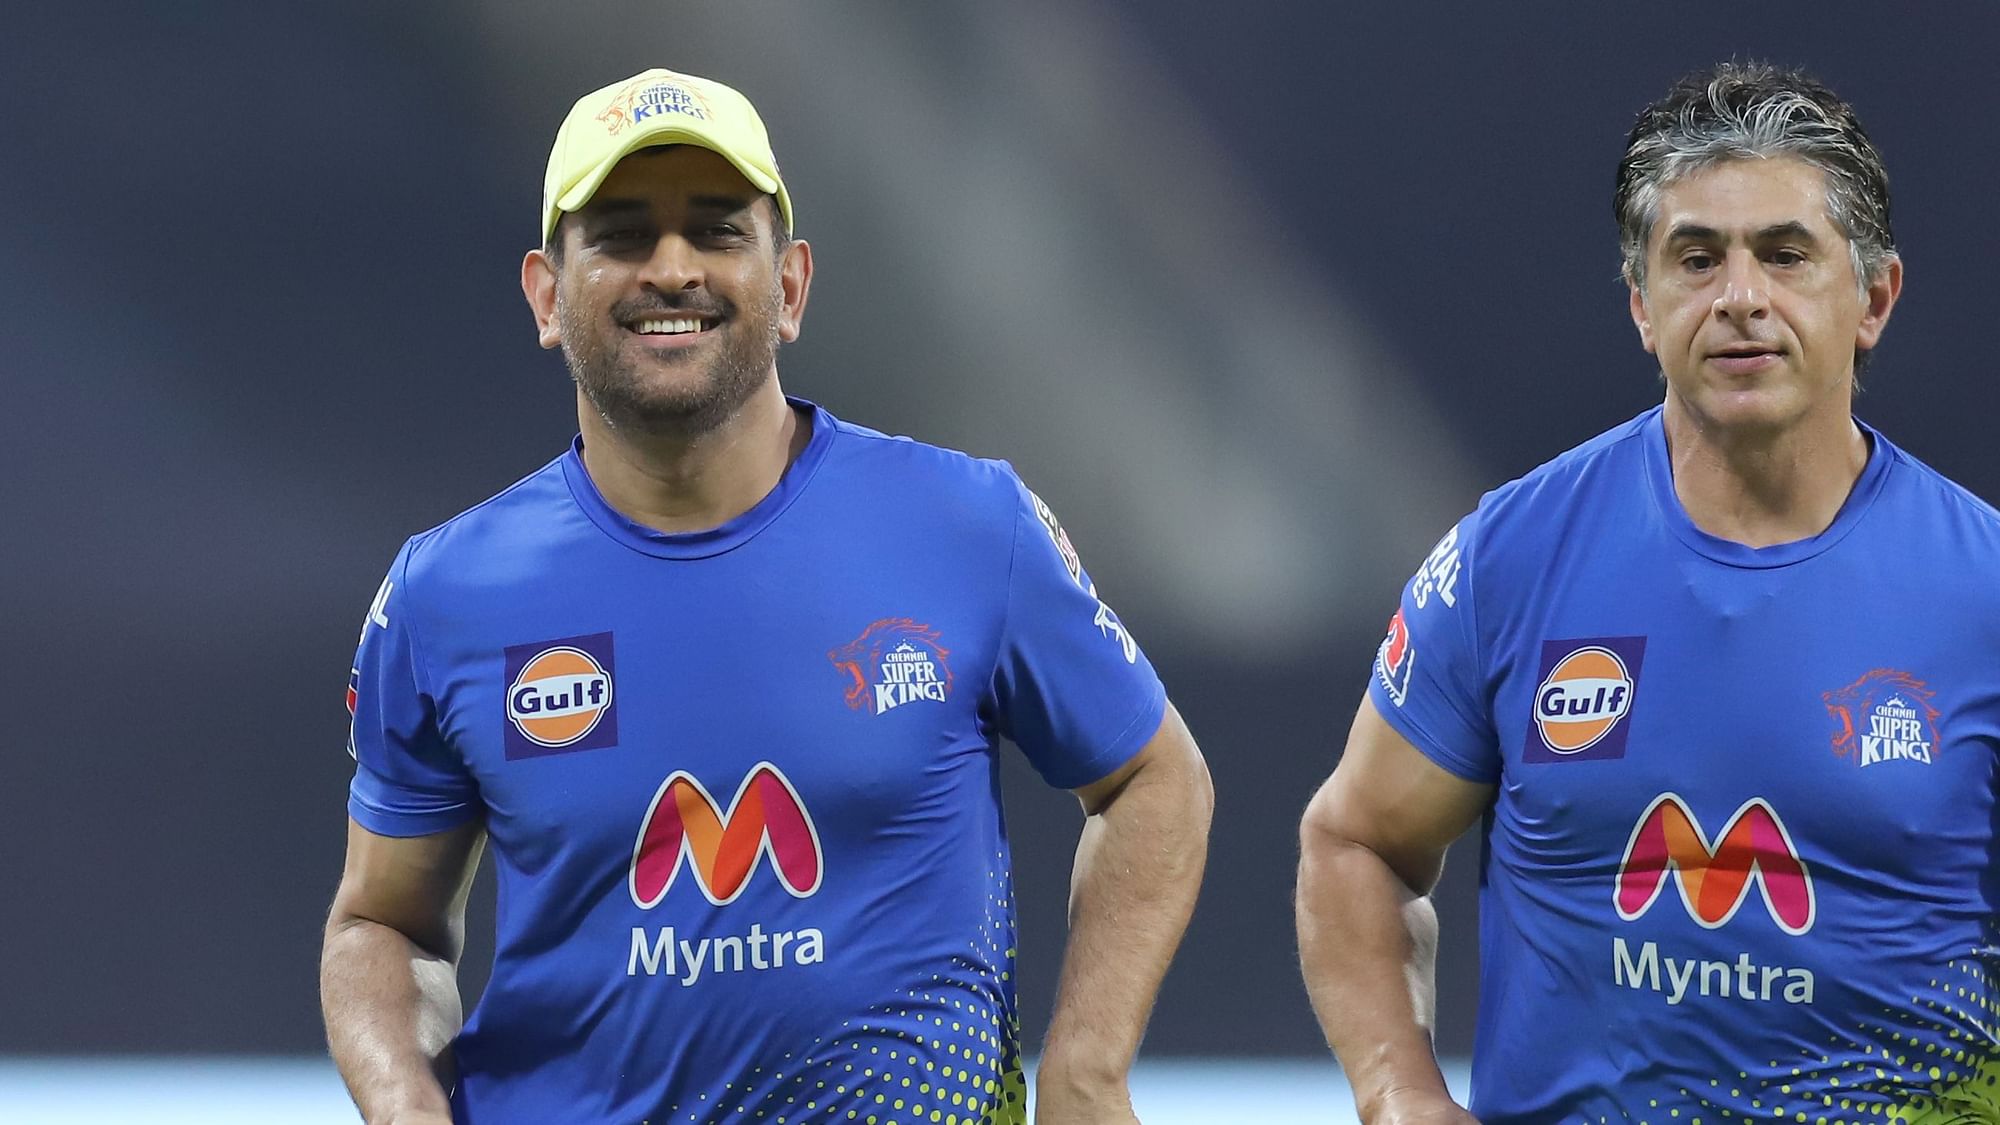 MS Dhoni has won the toss and elected to bowl first against Punjab Kings at the Wankhede Stadium in Mumbai.